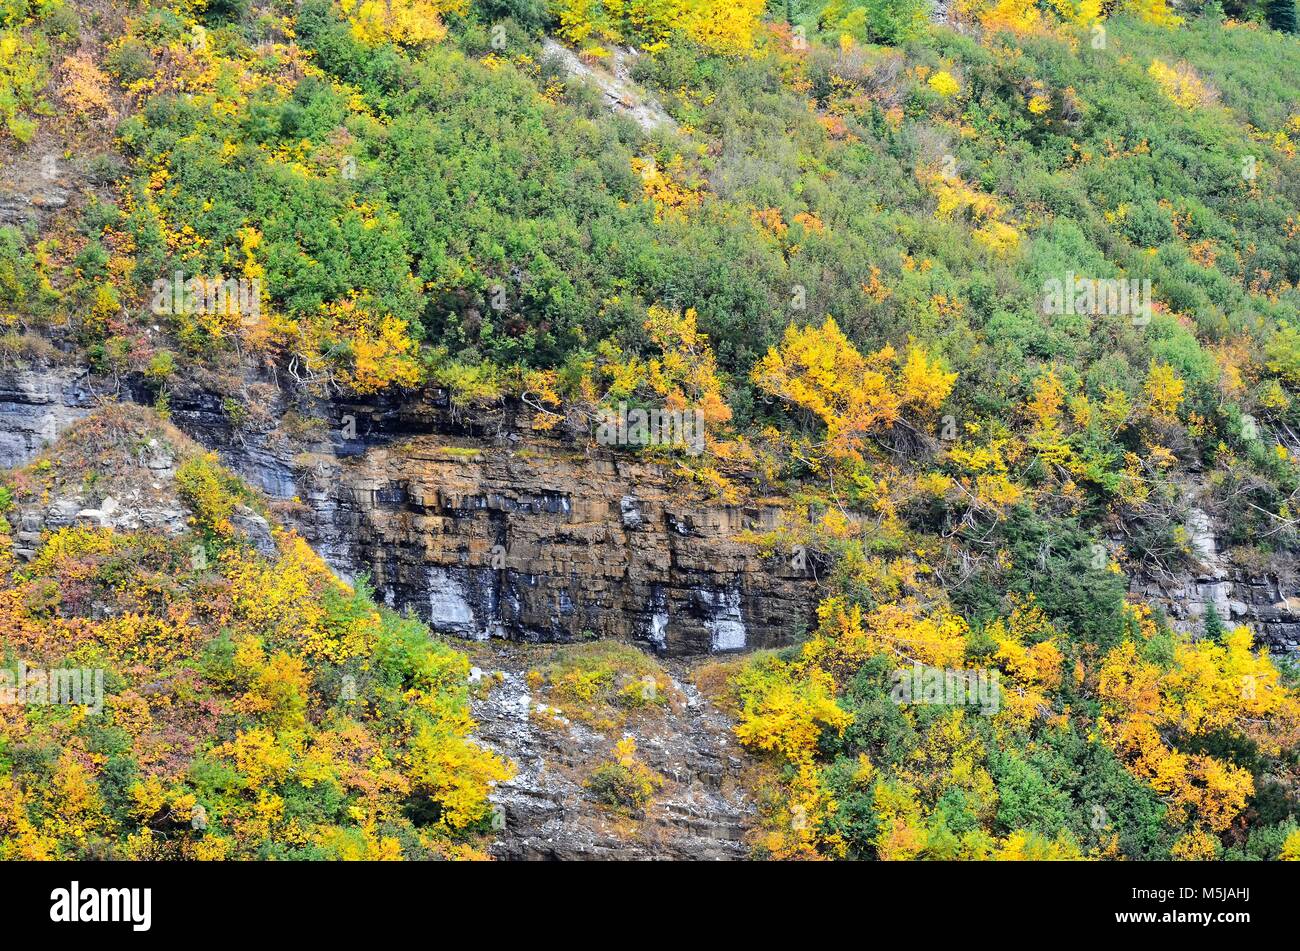 Way up high in the mountains the seasons are changing.  Leaves on the trees are stunning yellows and reds, with mountain water running over the rocks Stock Photo